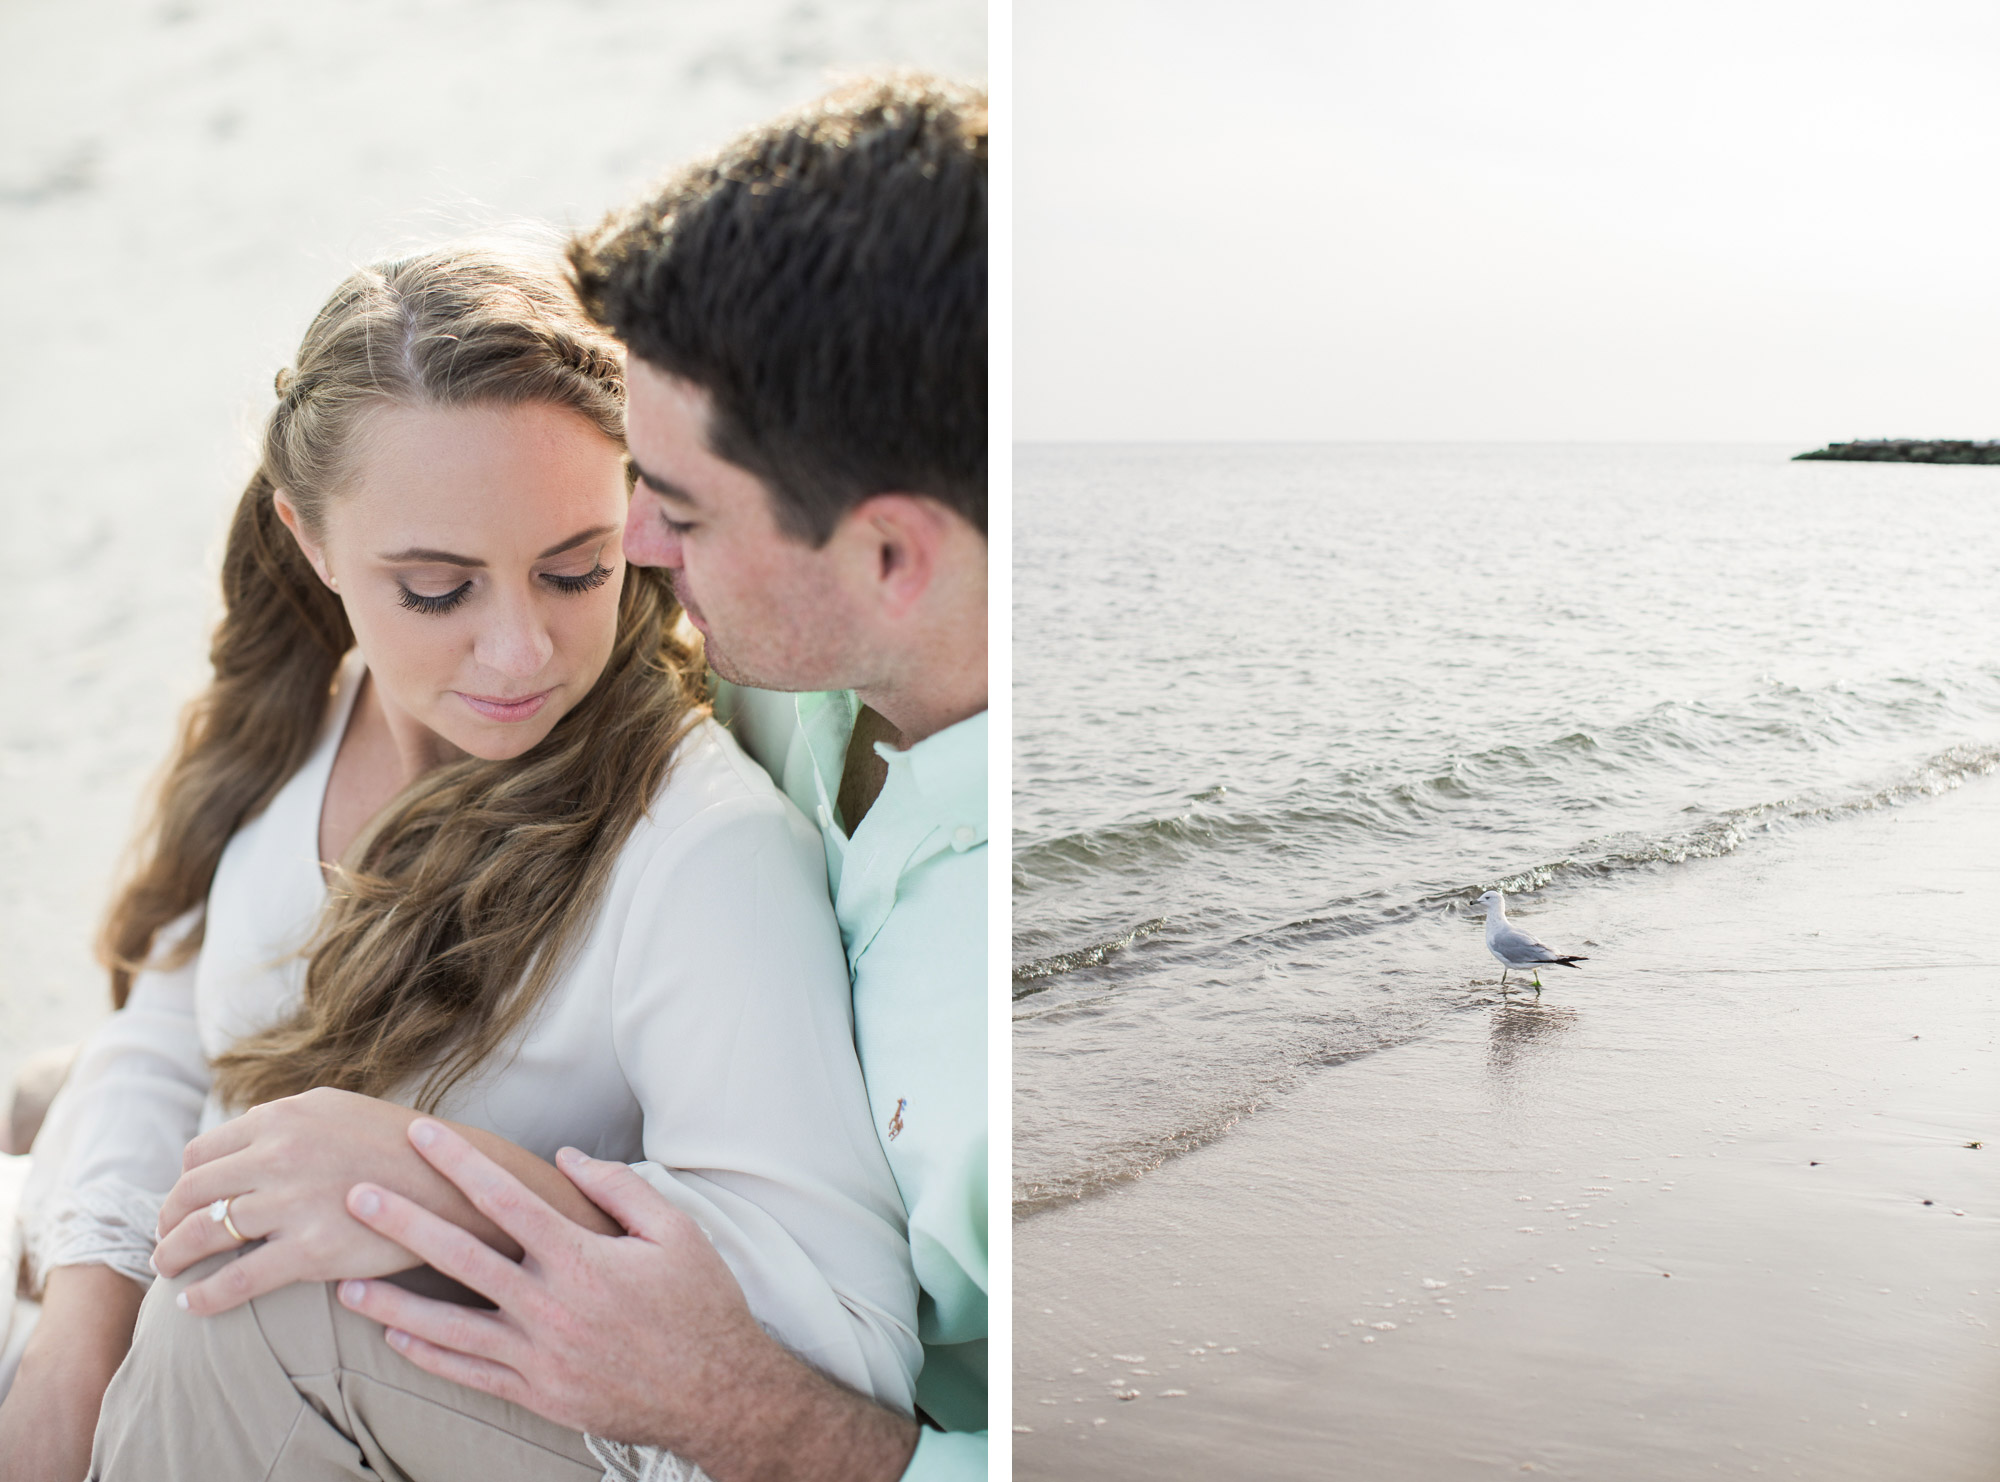 Engagement session in Long Beach, New York.